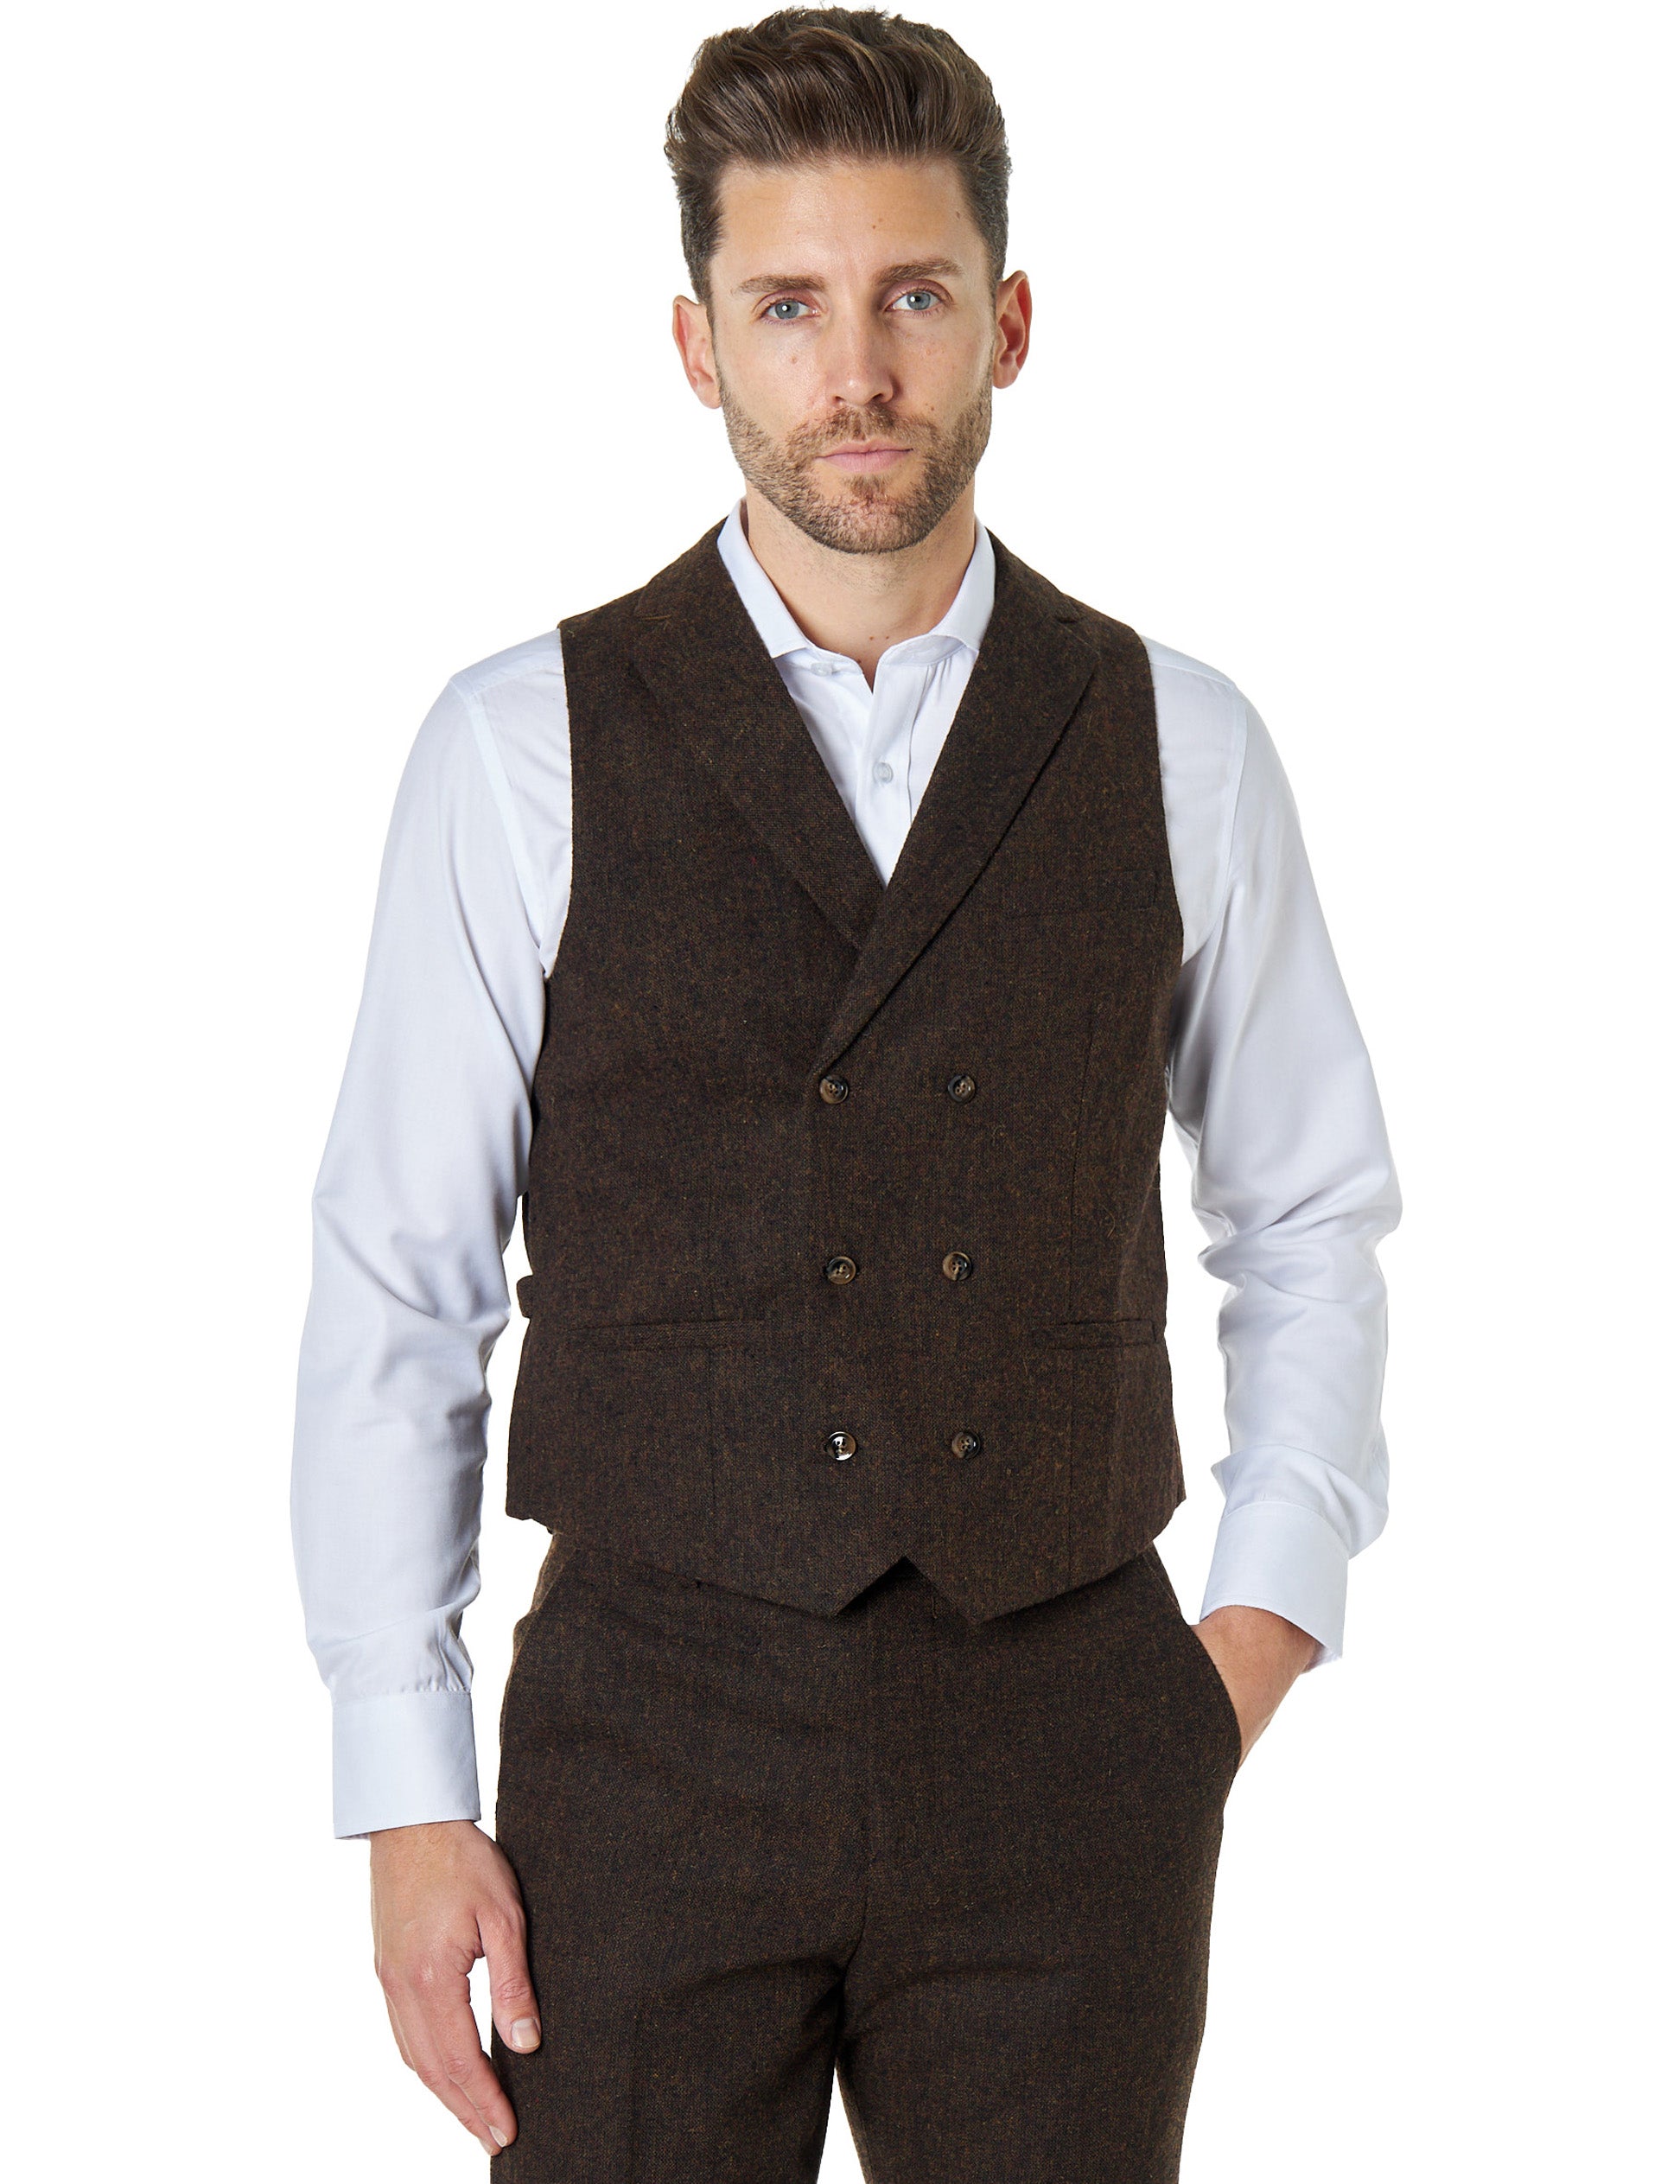 JIM - TWEED DOUBLE BREASTED WAISTCOAT – XPOSED